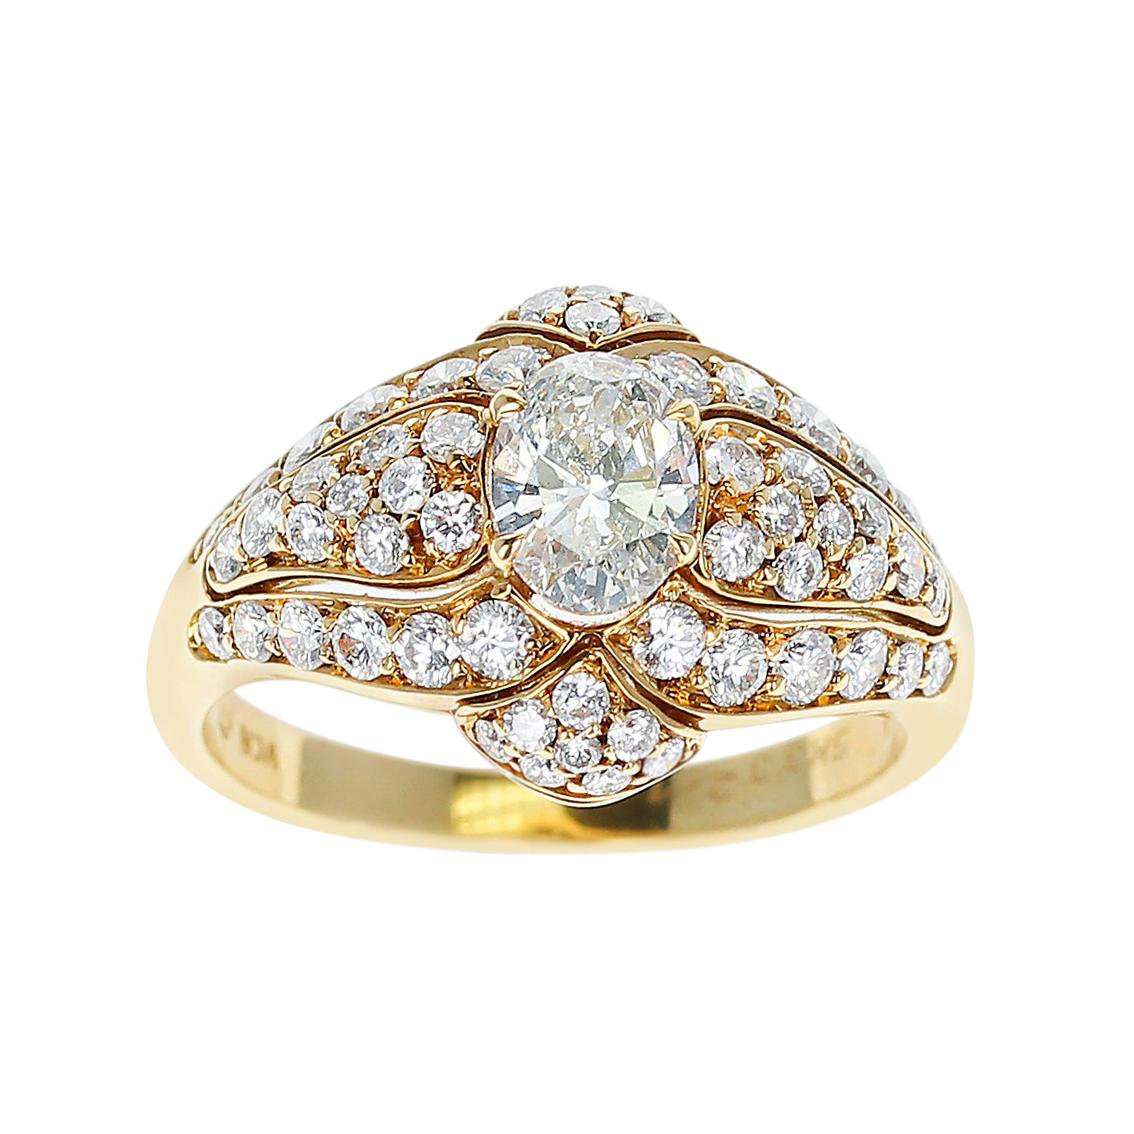 Van Cleef & Arpels 0.55 Carat Oval Diamond Ring Accented with Diamonds, 18K Gold